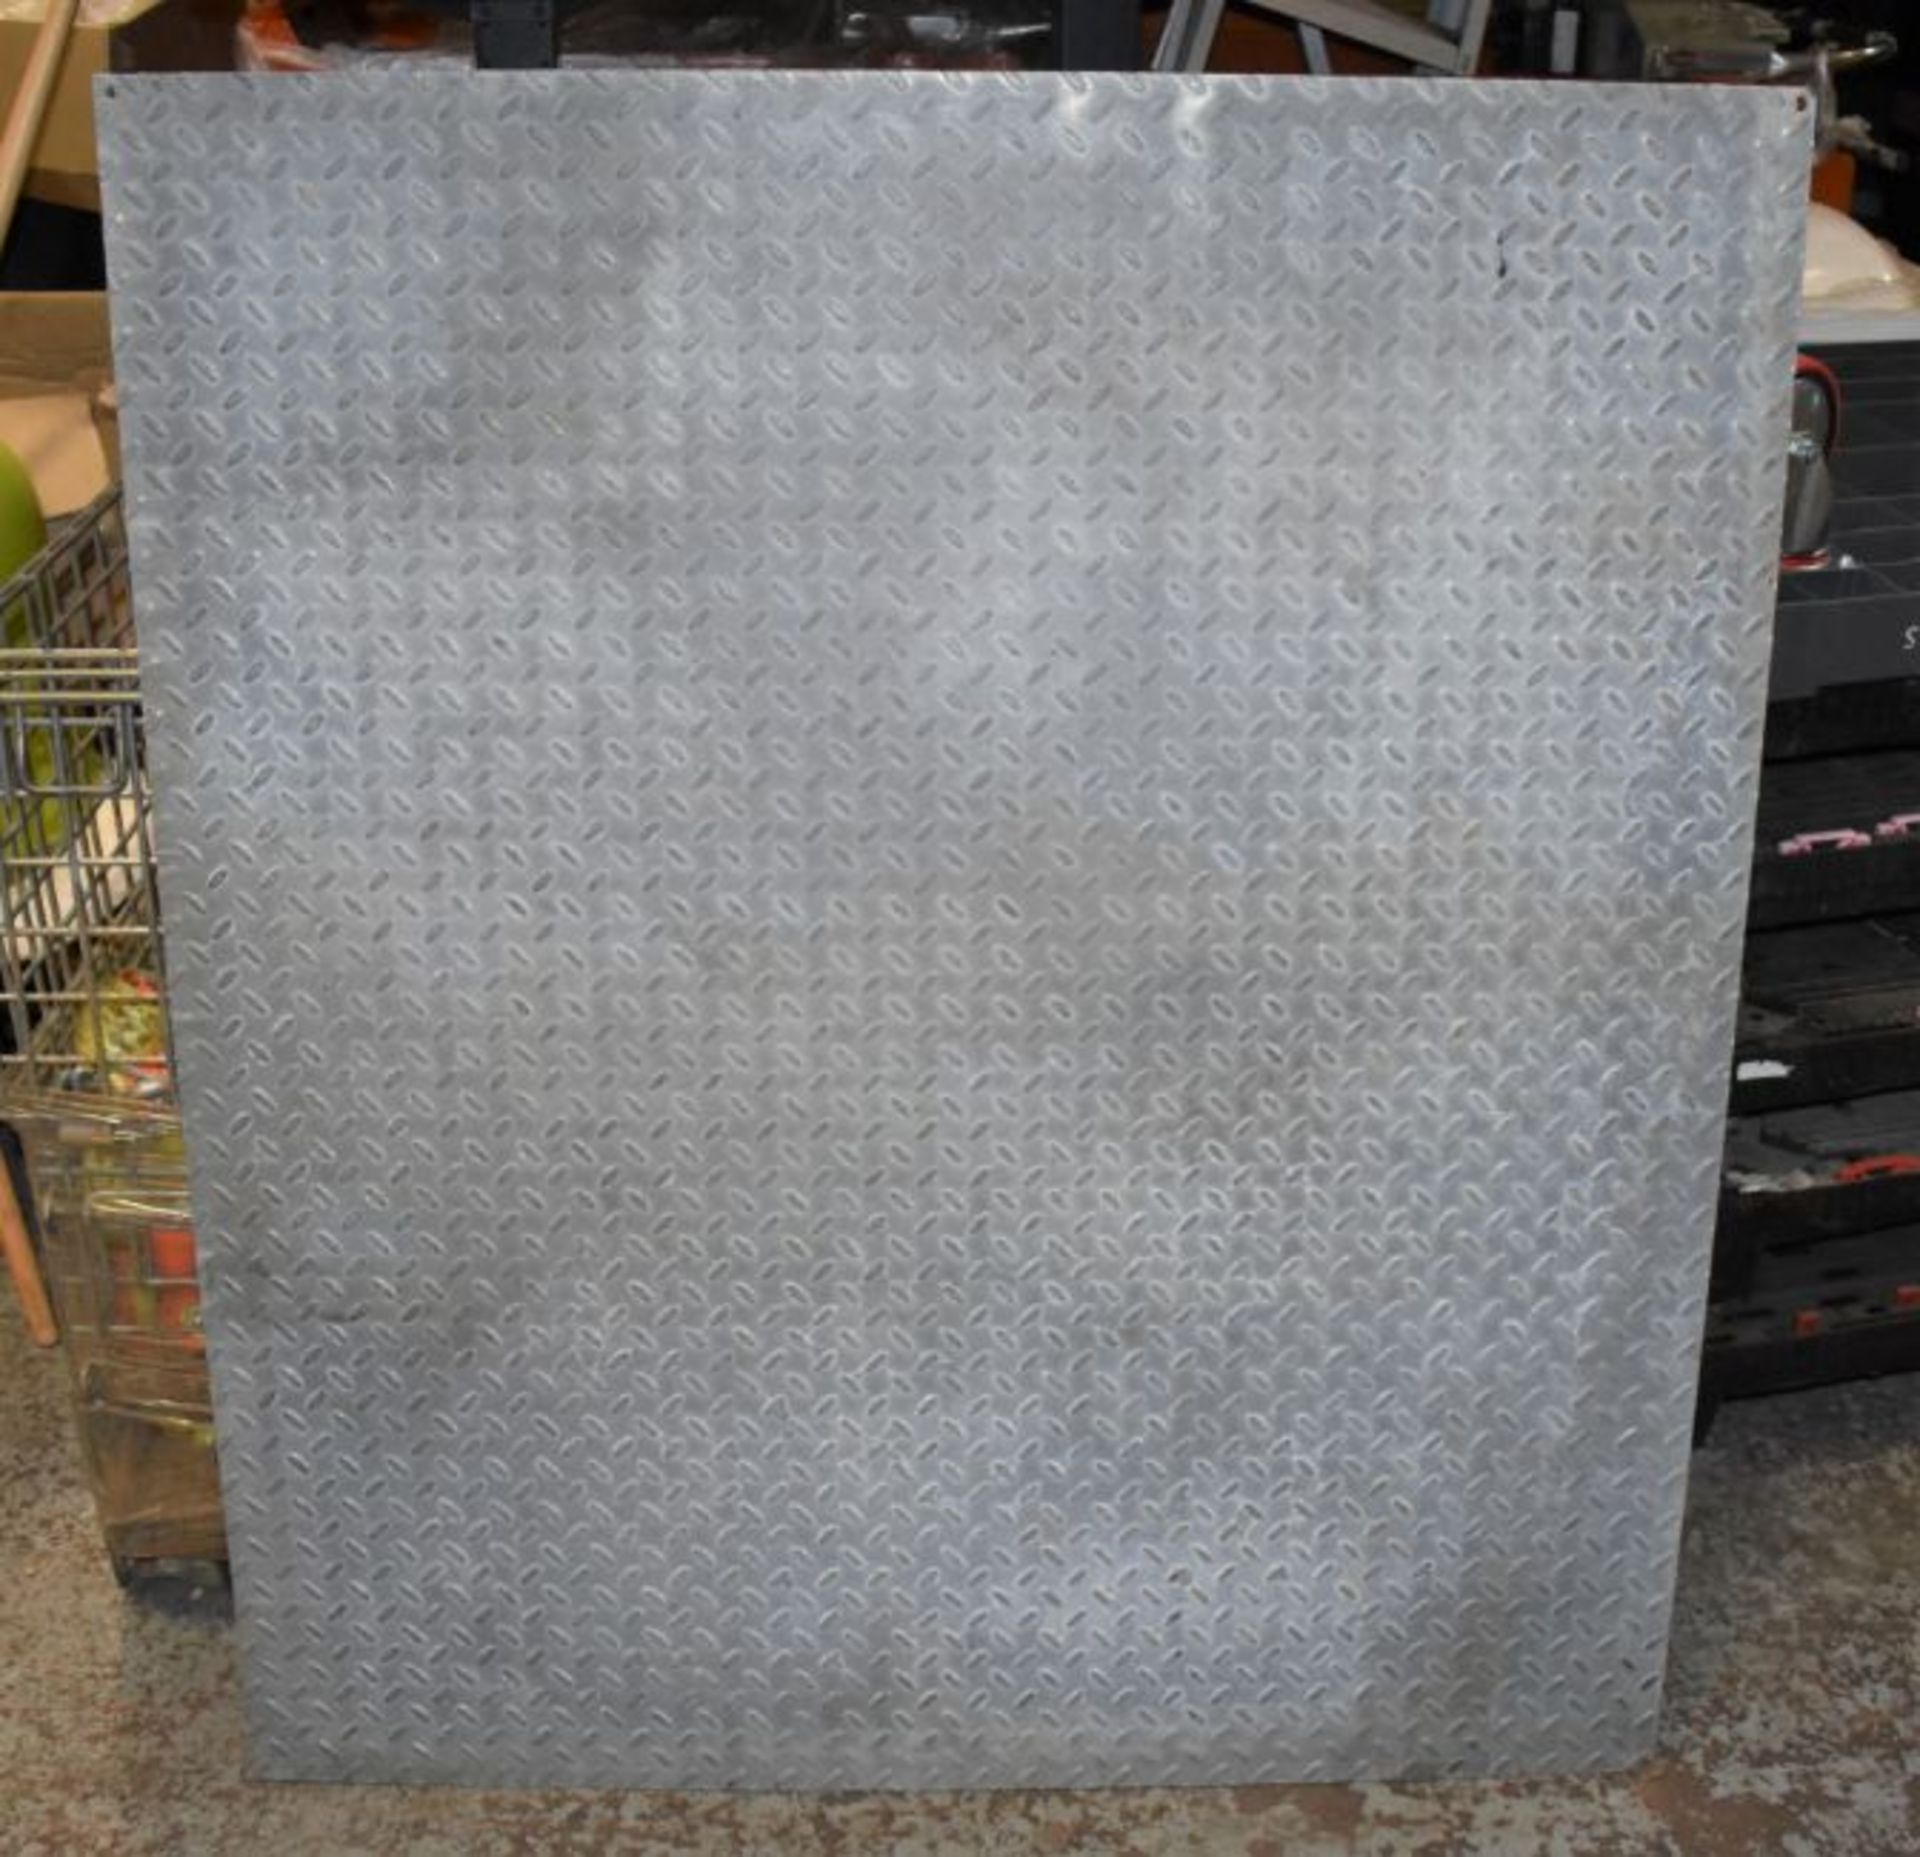 1 x Steel Tread Checker Plate - Size 106.5 x 122 x 0.6 cms - None Slip Floor Plate Suitable For - Image 4 of 6